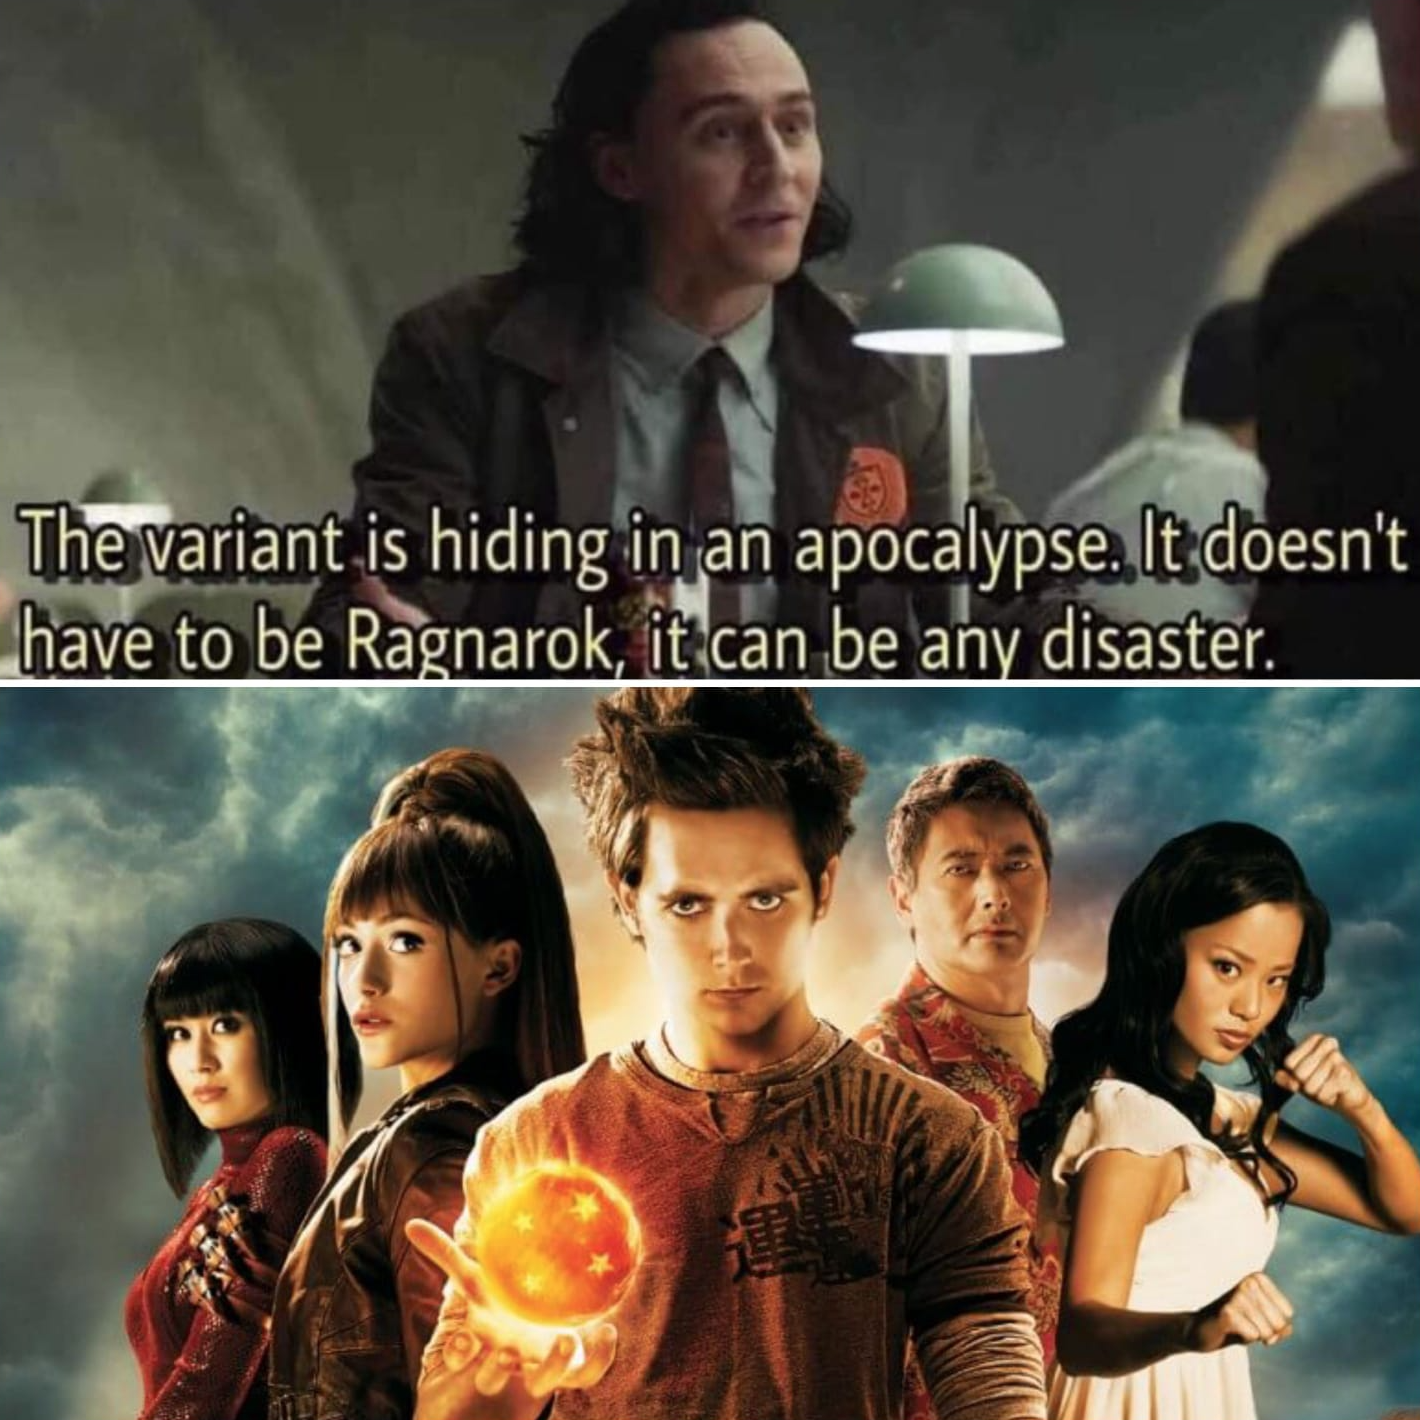 funny gaming memes - dragonball evolution - The variant is hiding in an apocalypse. It doesn't have to be Ragnarok, it can be any disaster.